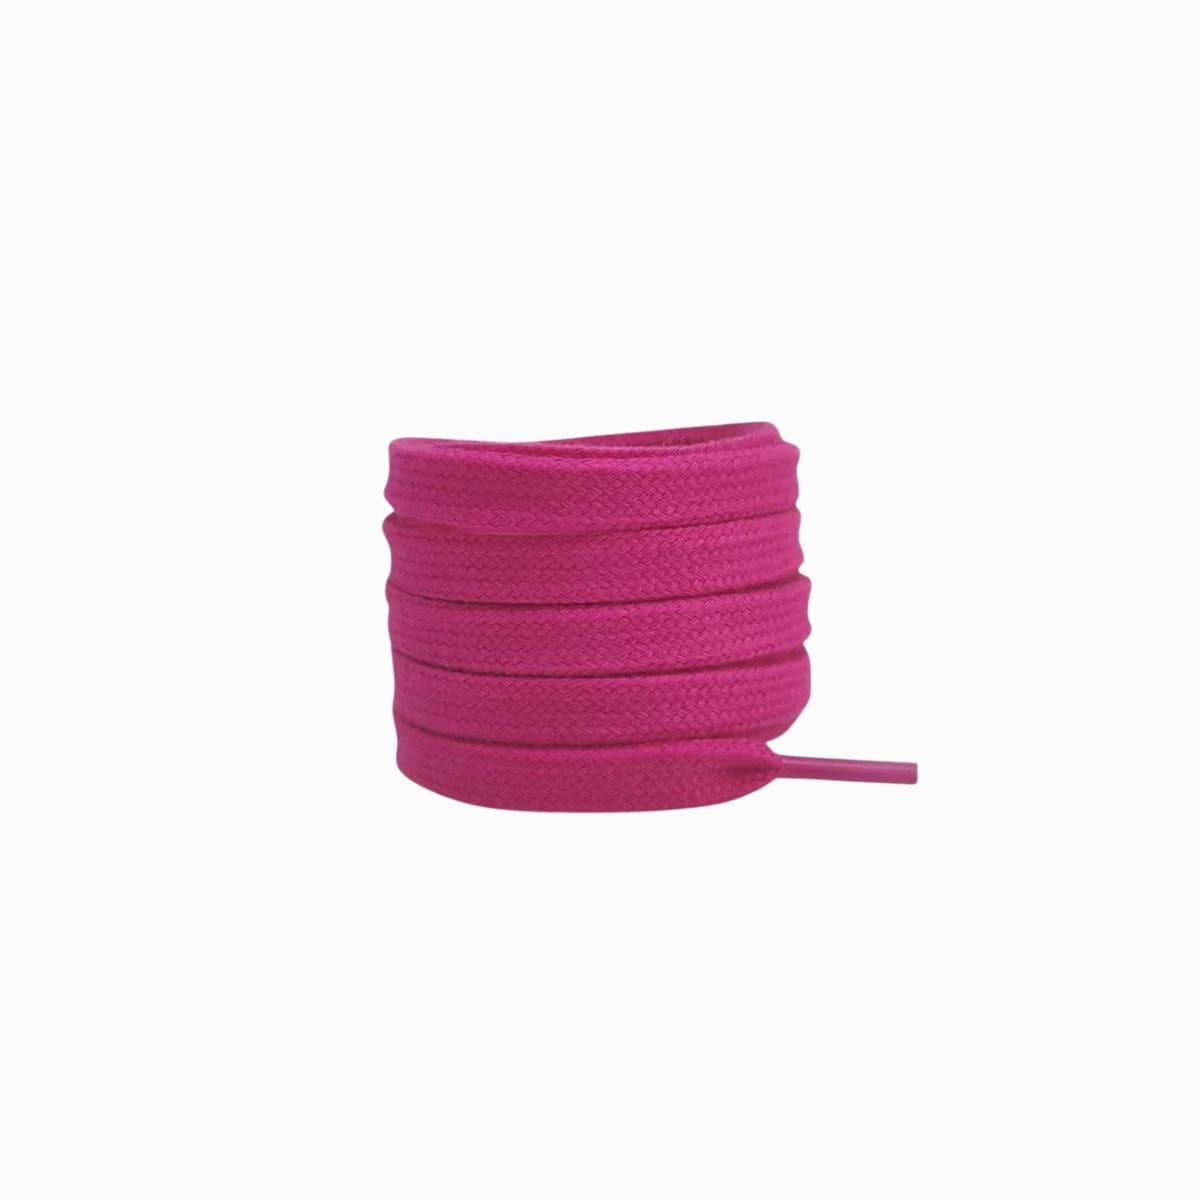 Rose Pink Replacement Shoe Laces for Adidas Samba Sneakers by Kicks Shoelaces